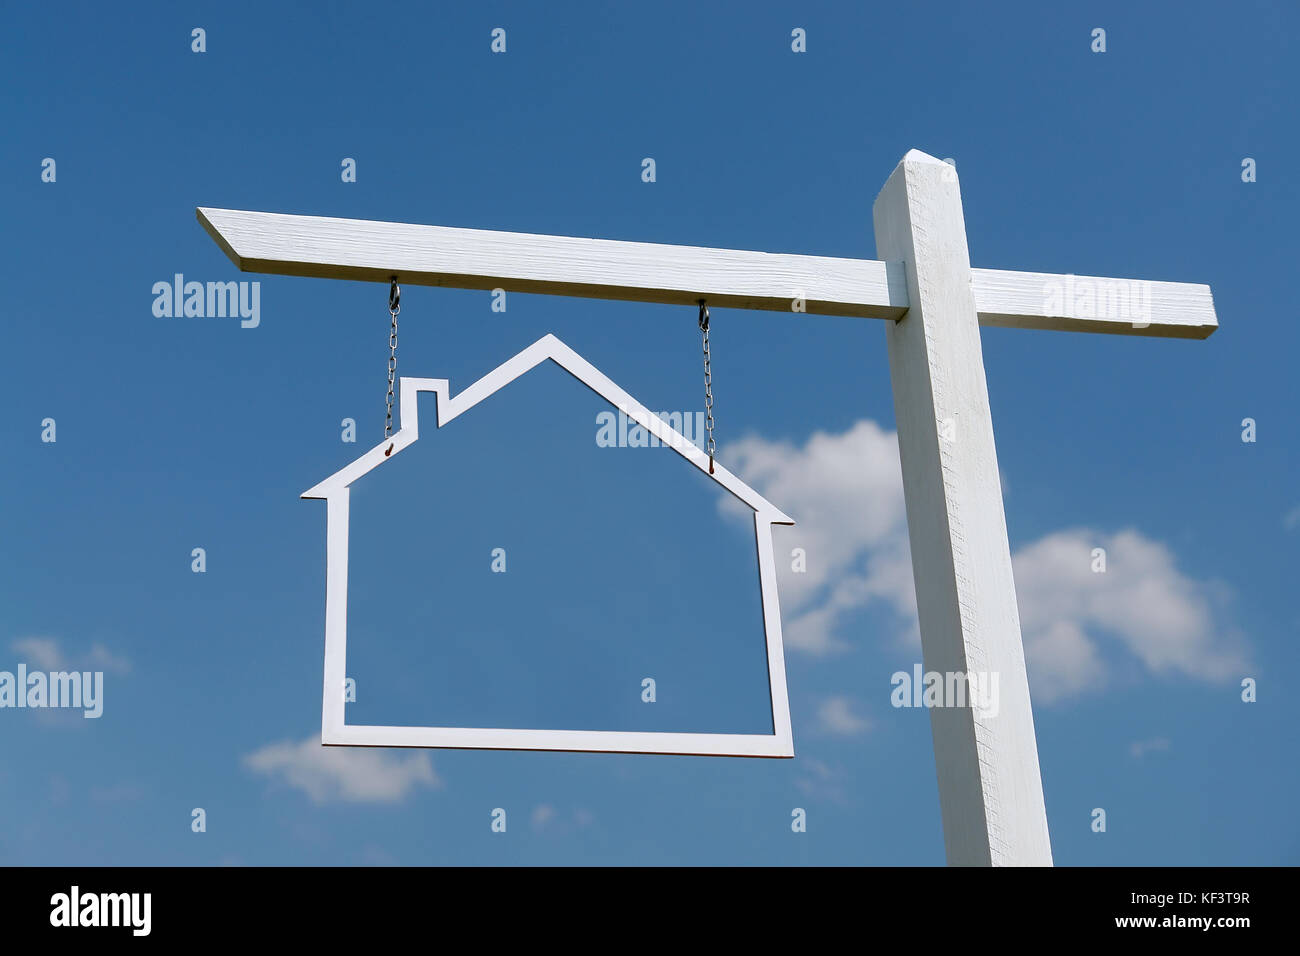 Wooden post with house-shaped frame hanging over blue sky Stock Photo